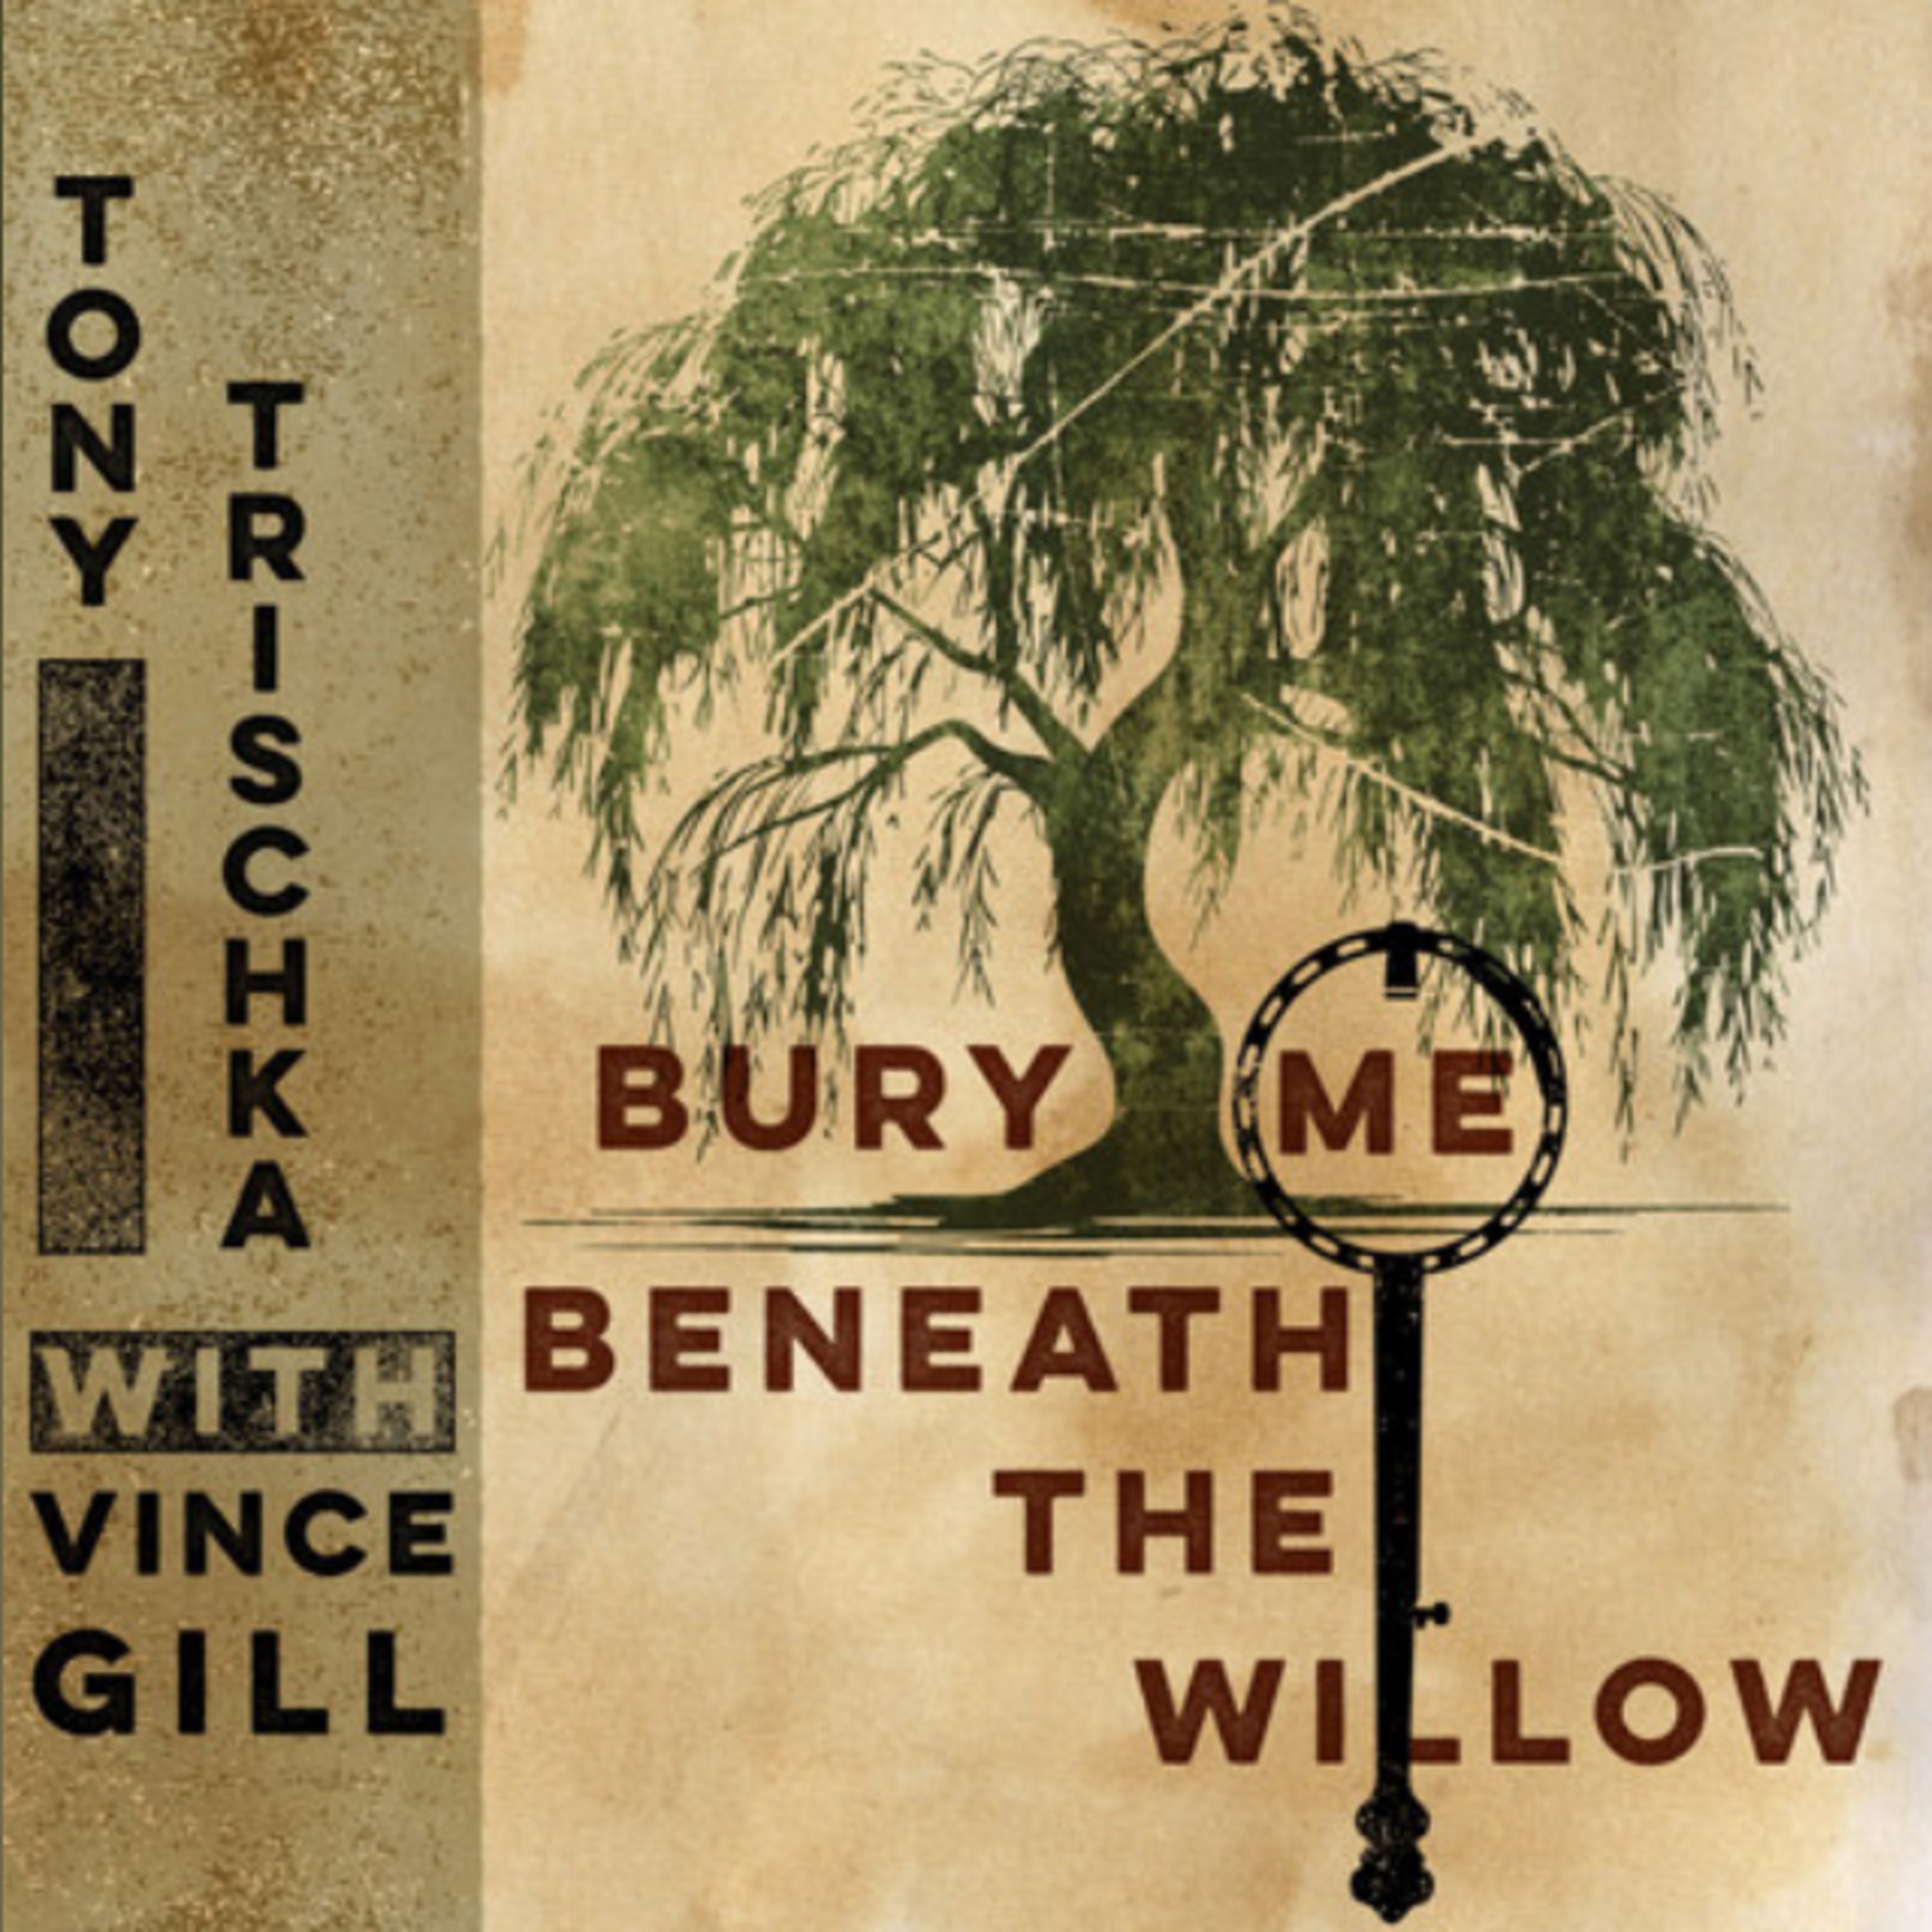 Tony Trischka Enlists The Great Vince Gill To Sing On “Bury Me Beneath The Willow”